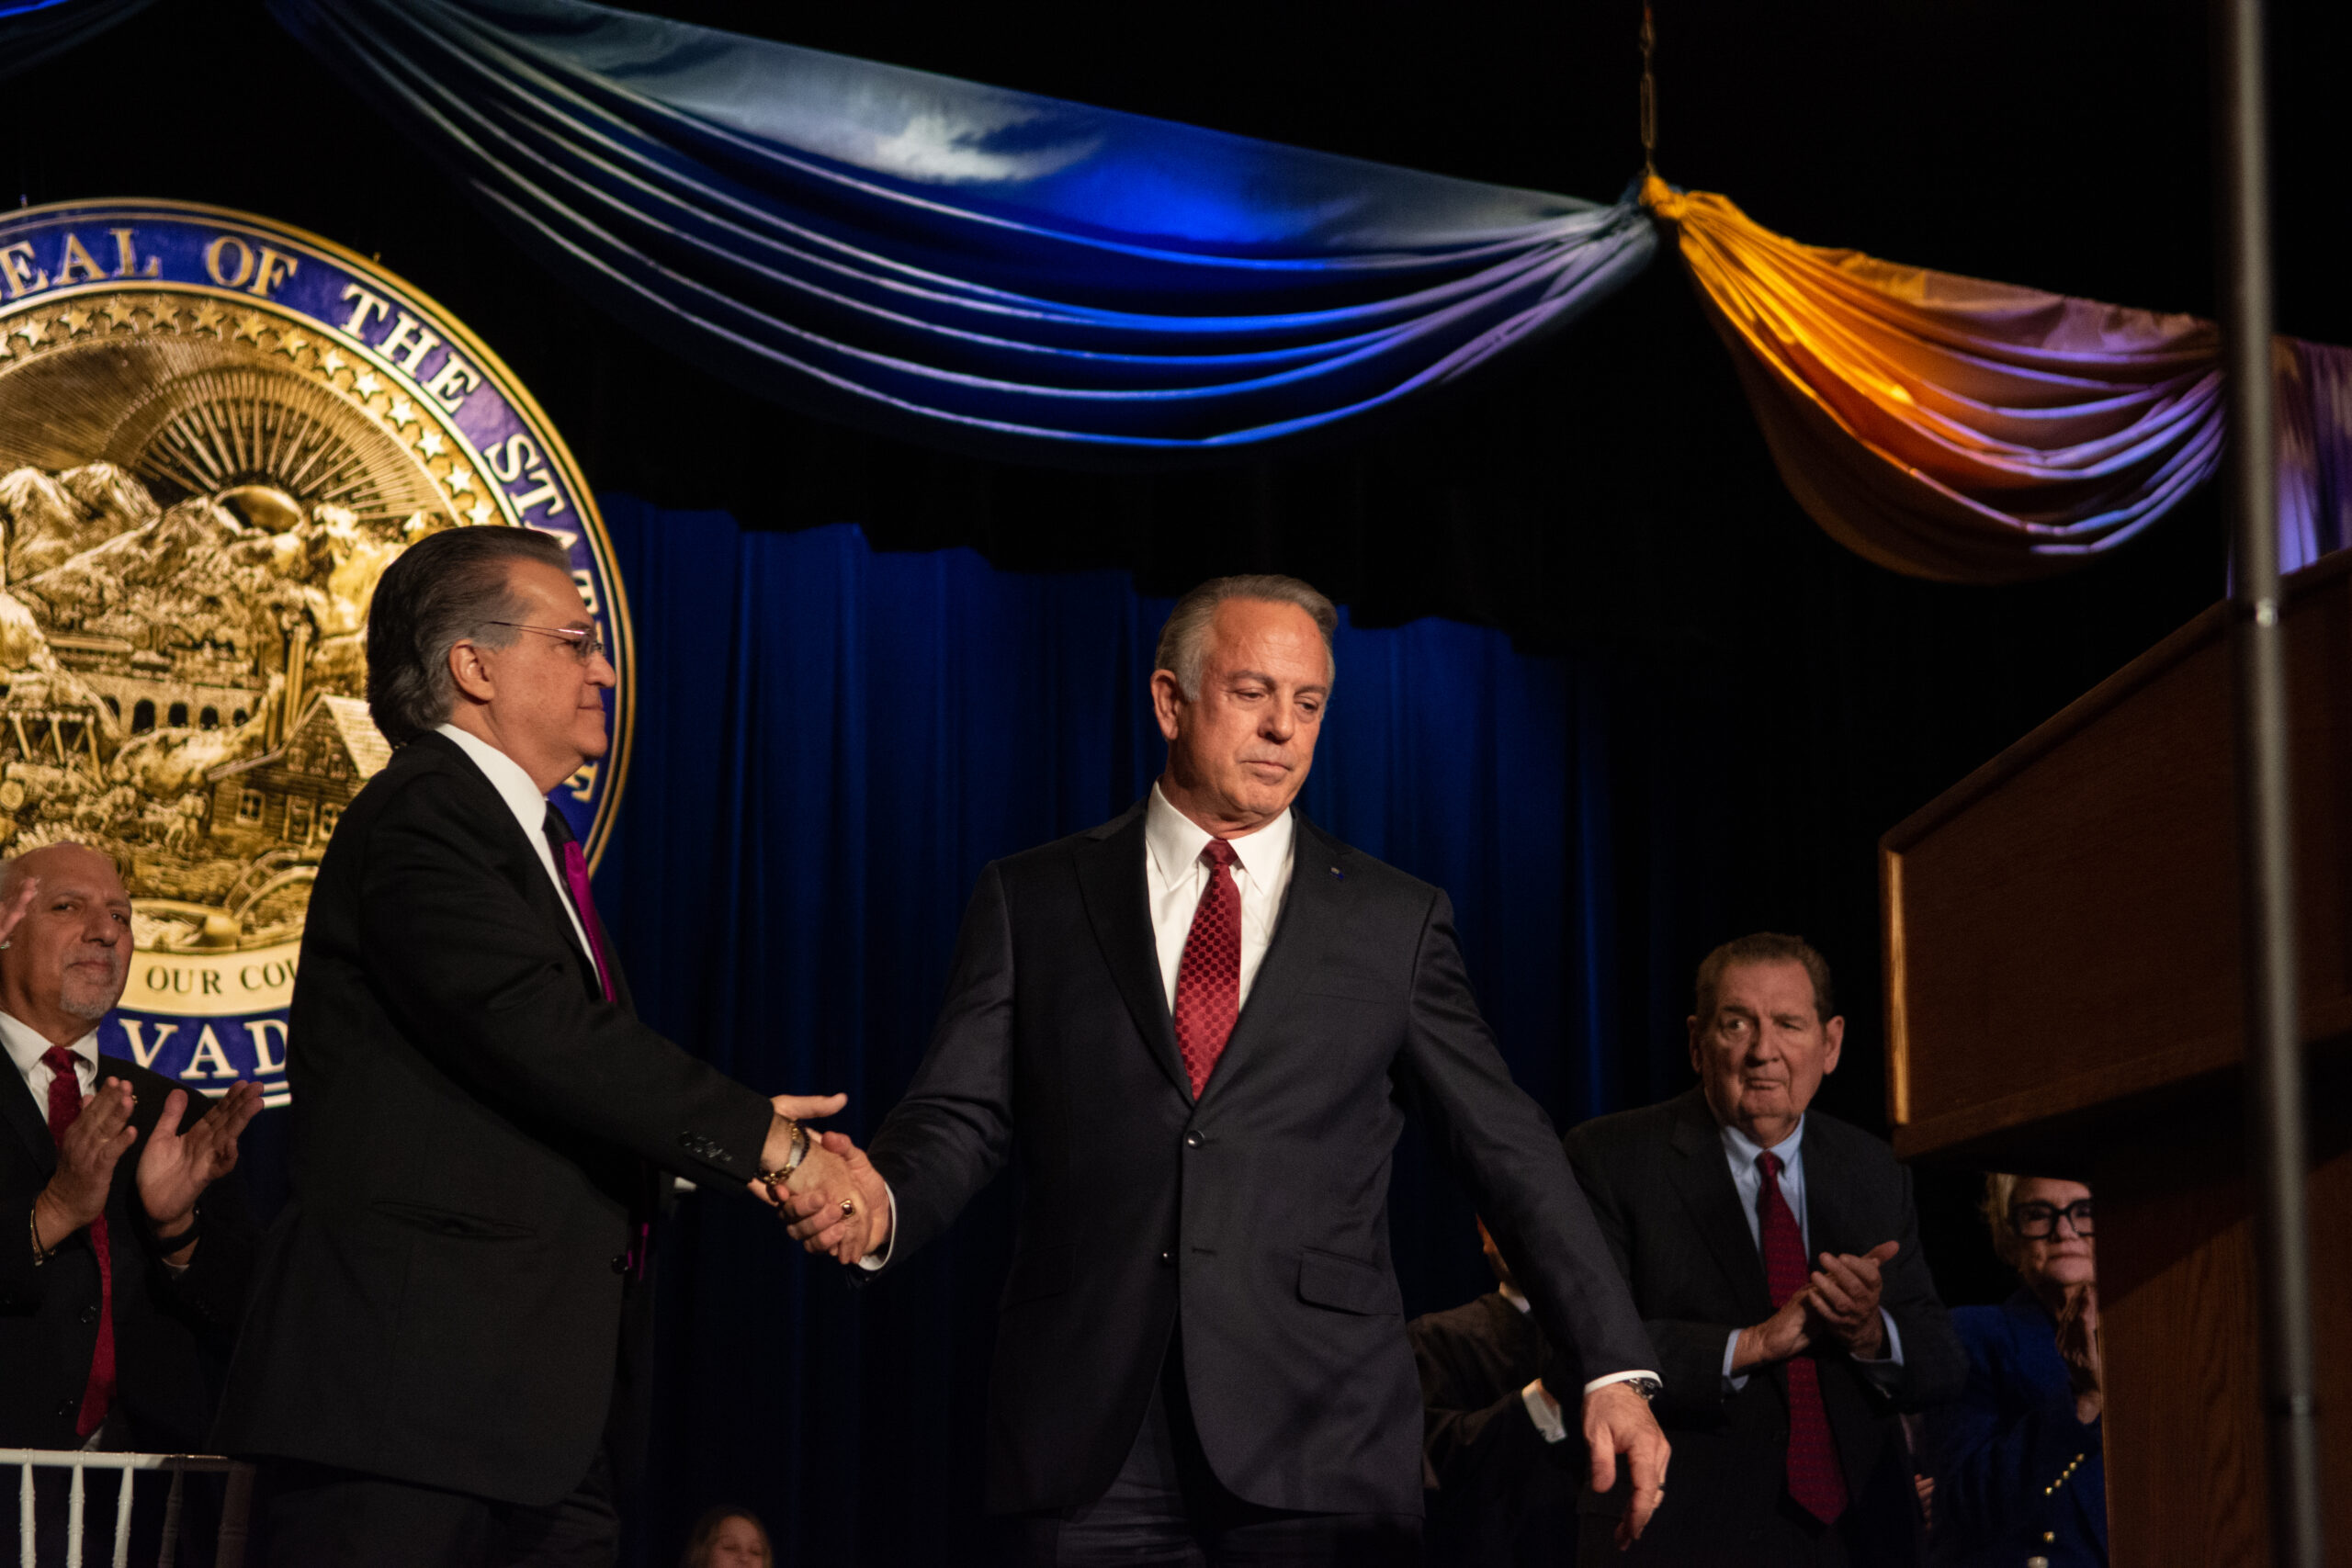 Gov. Joe Lombardo on stage before giving his inauguration speech on Jan. 3, 2023 at the Carson City Community Center. (David Calvert/The Nevada Independent)